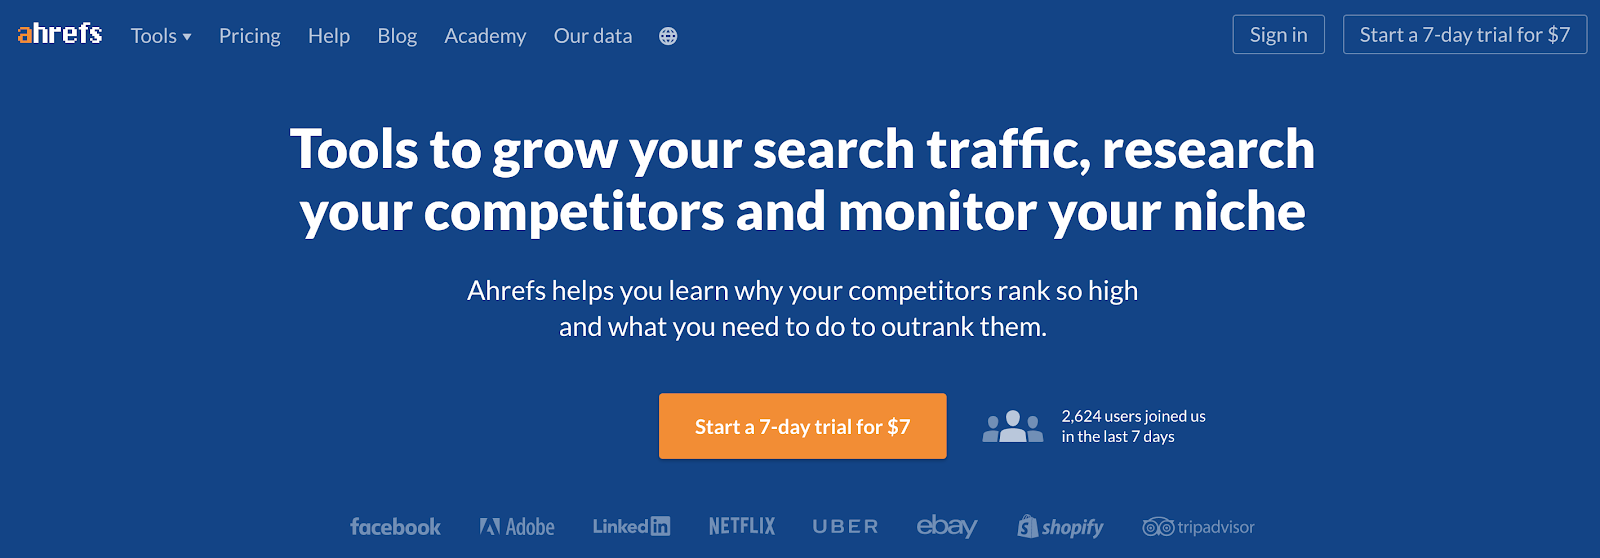 Ahrefs SEO Tool for Strategically Finding the Right Keywords to Blog About